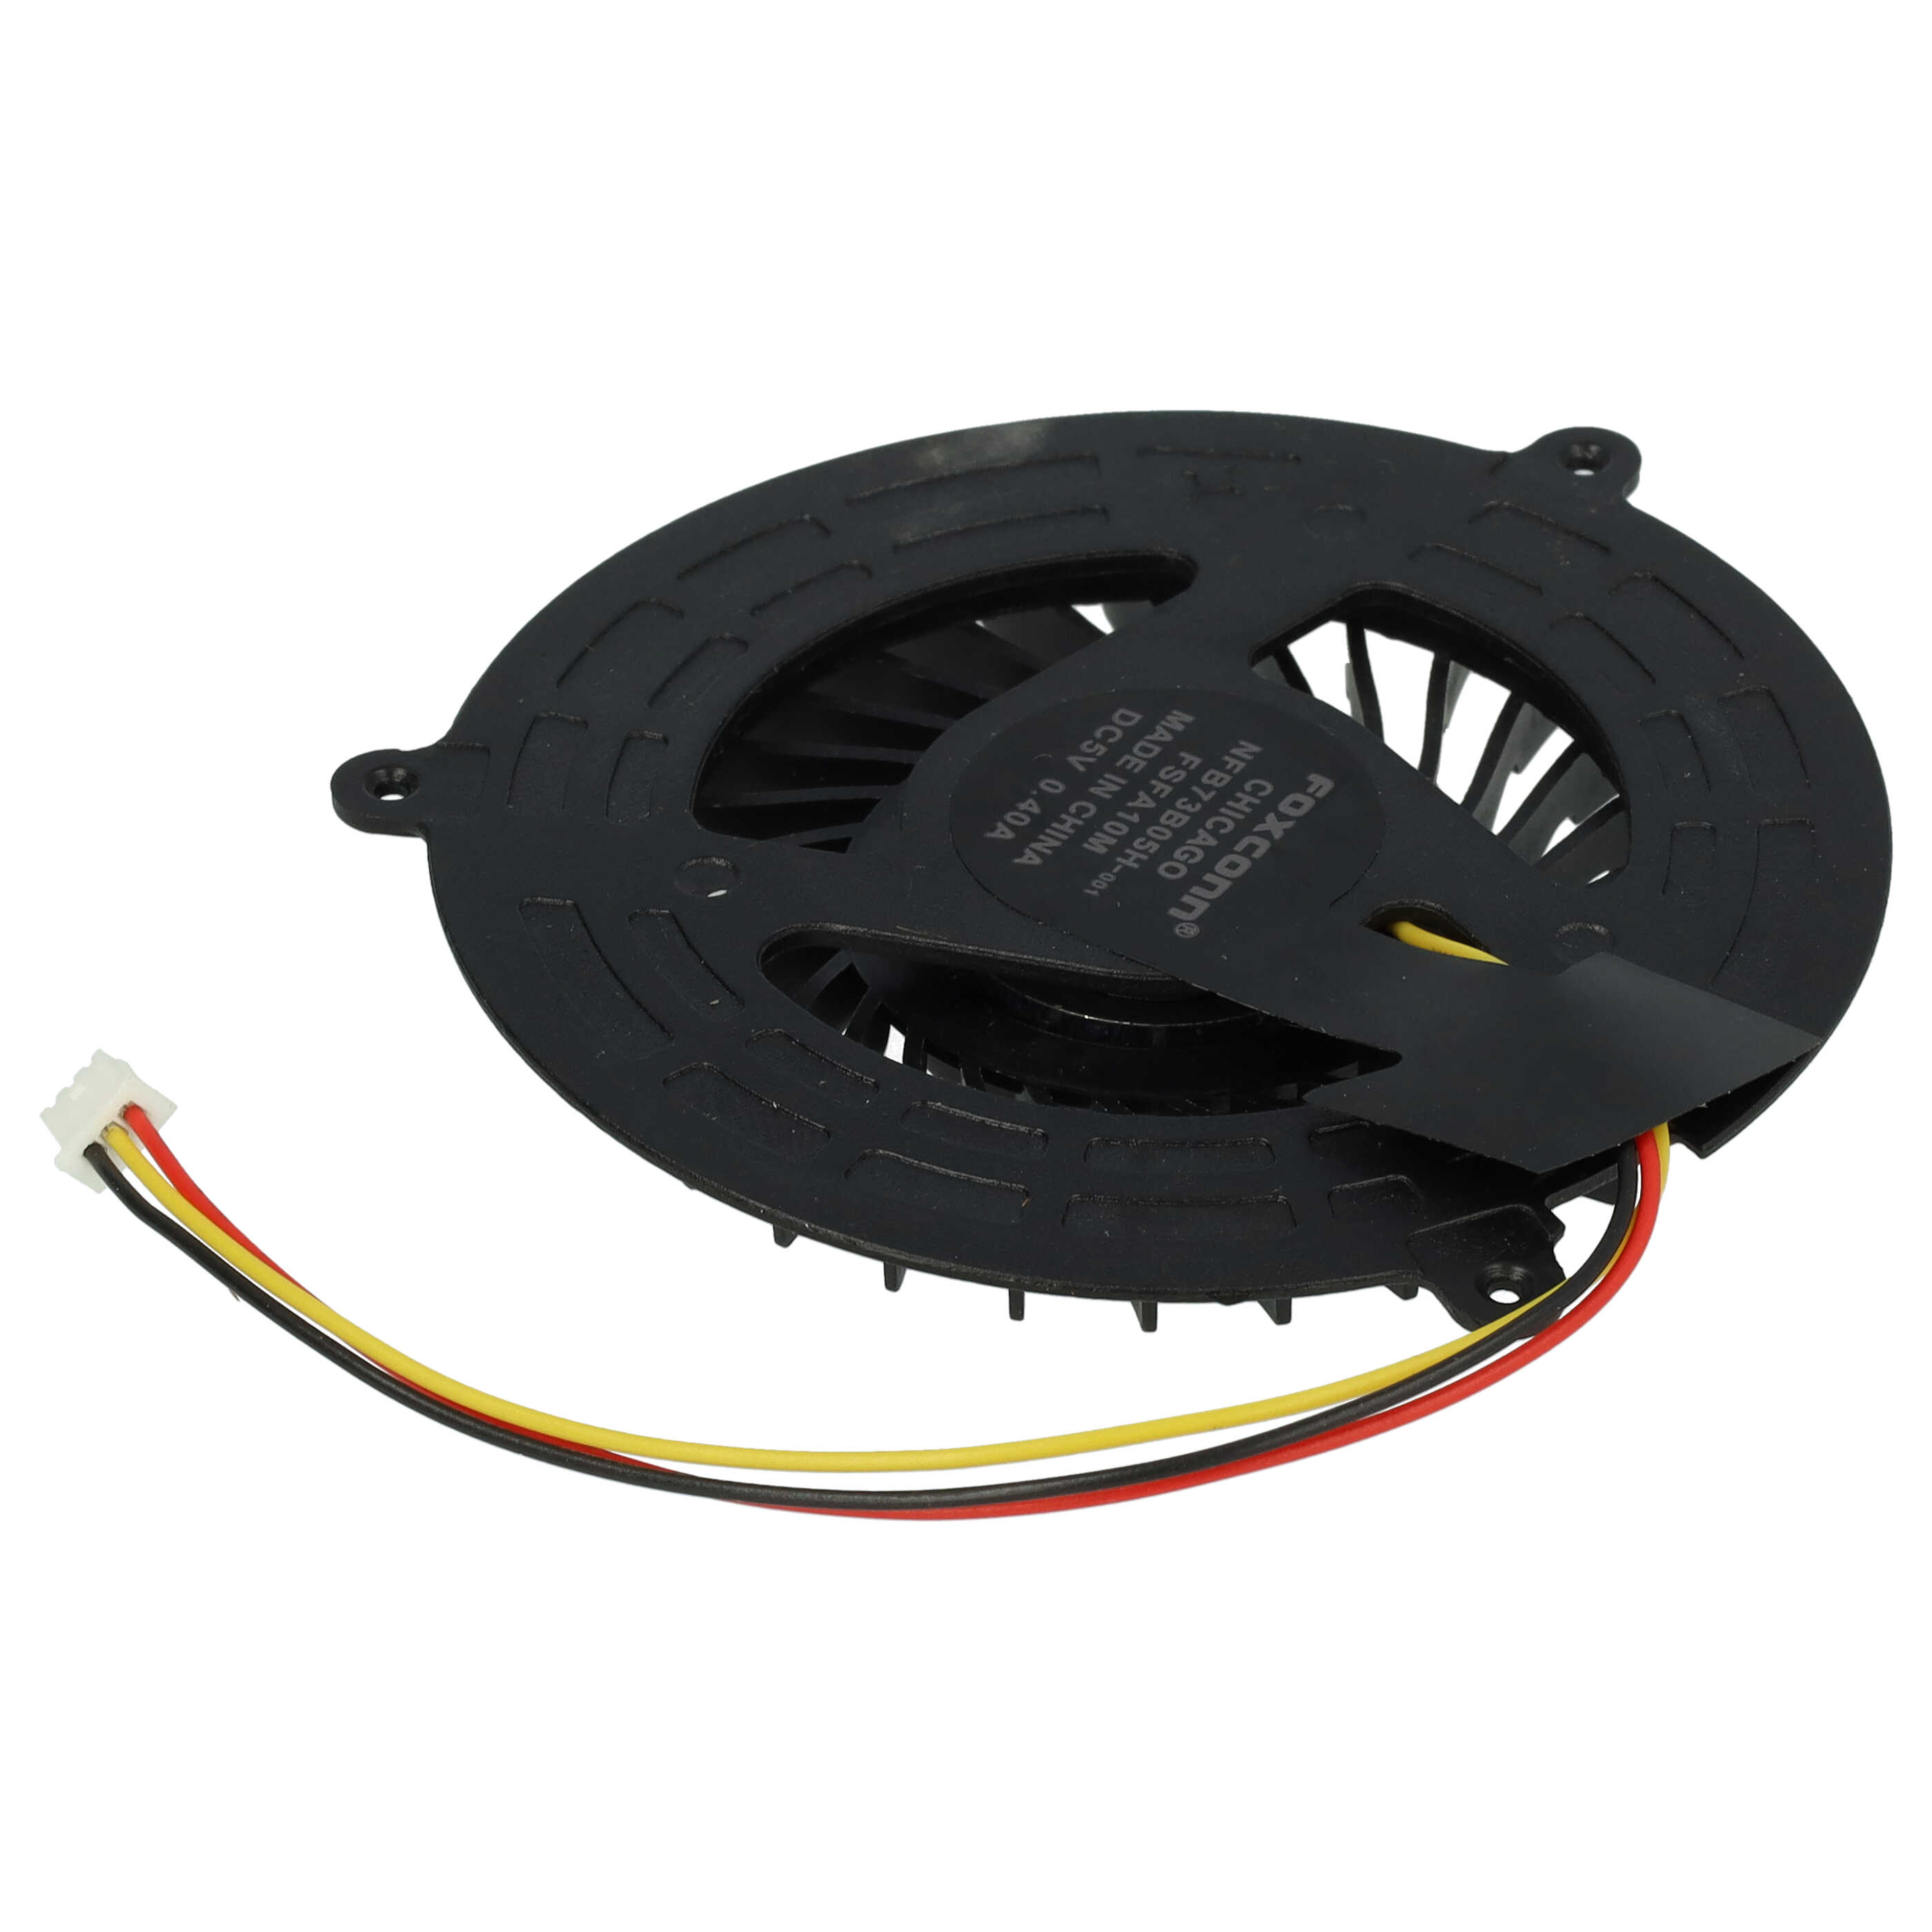 CPU / GPU Fan replaces Acer KSB06105HA for Acer Notebook 72 x 72 x 11 mm